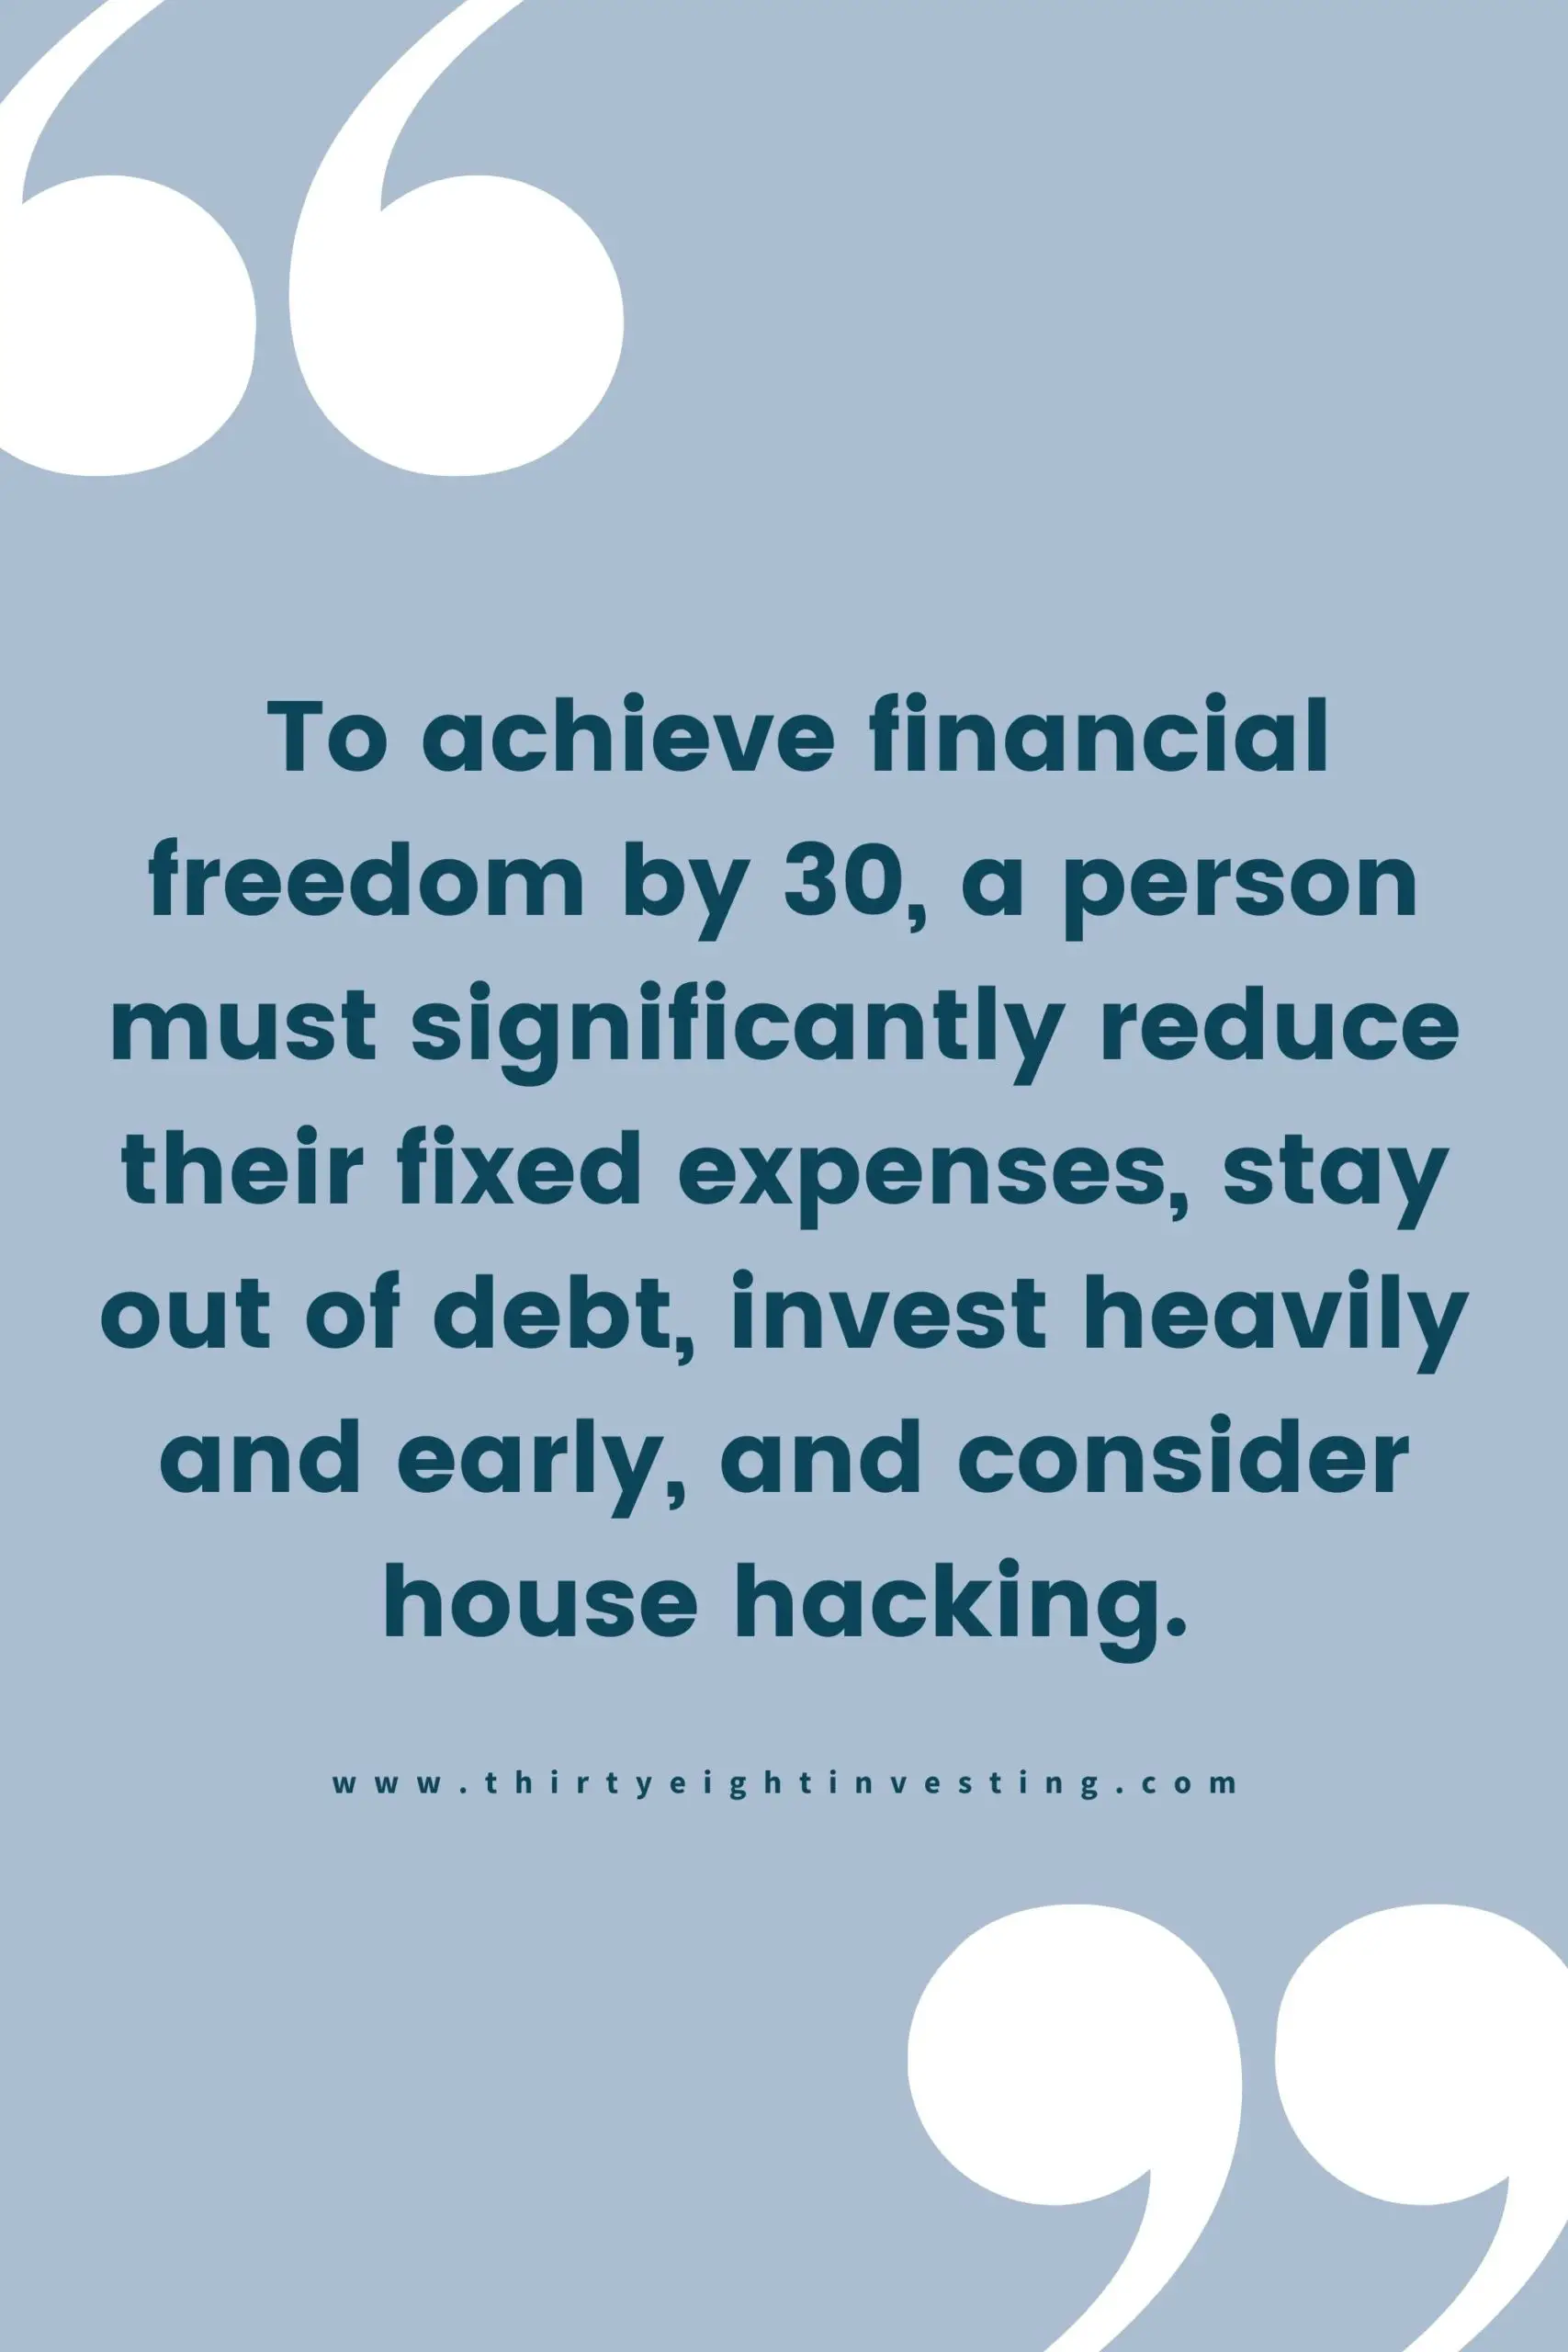 financial independence by 30